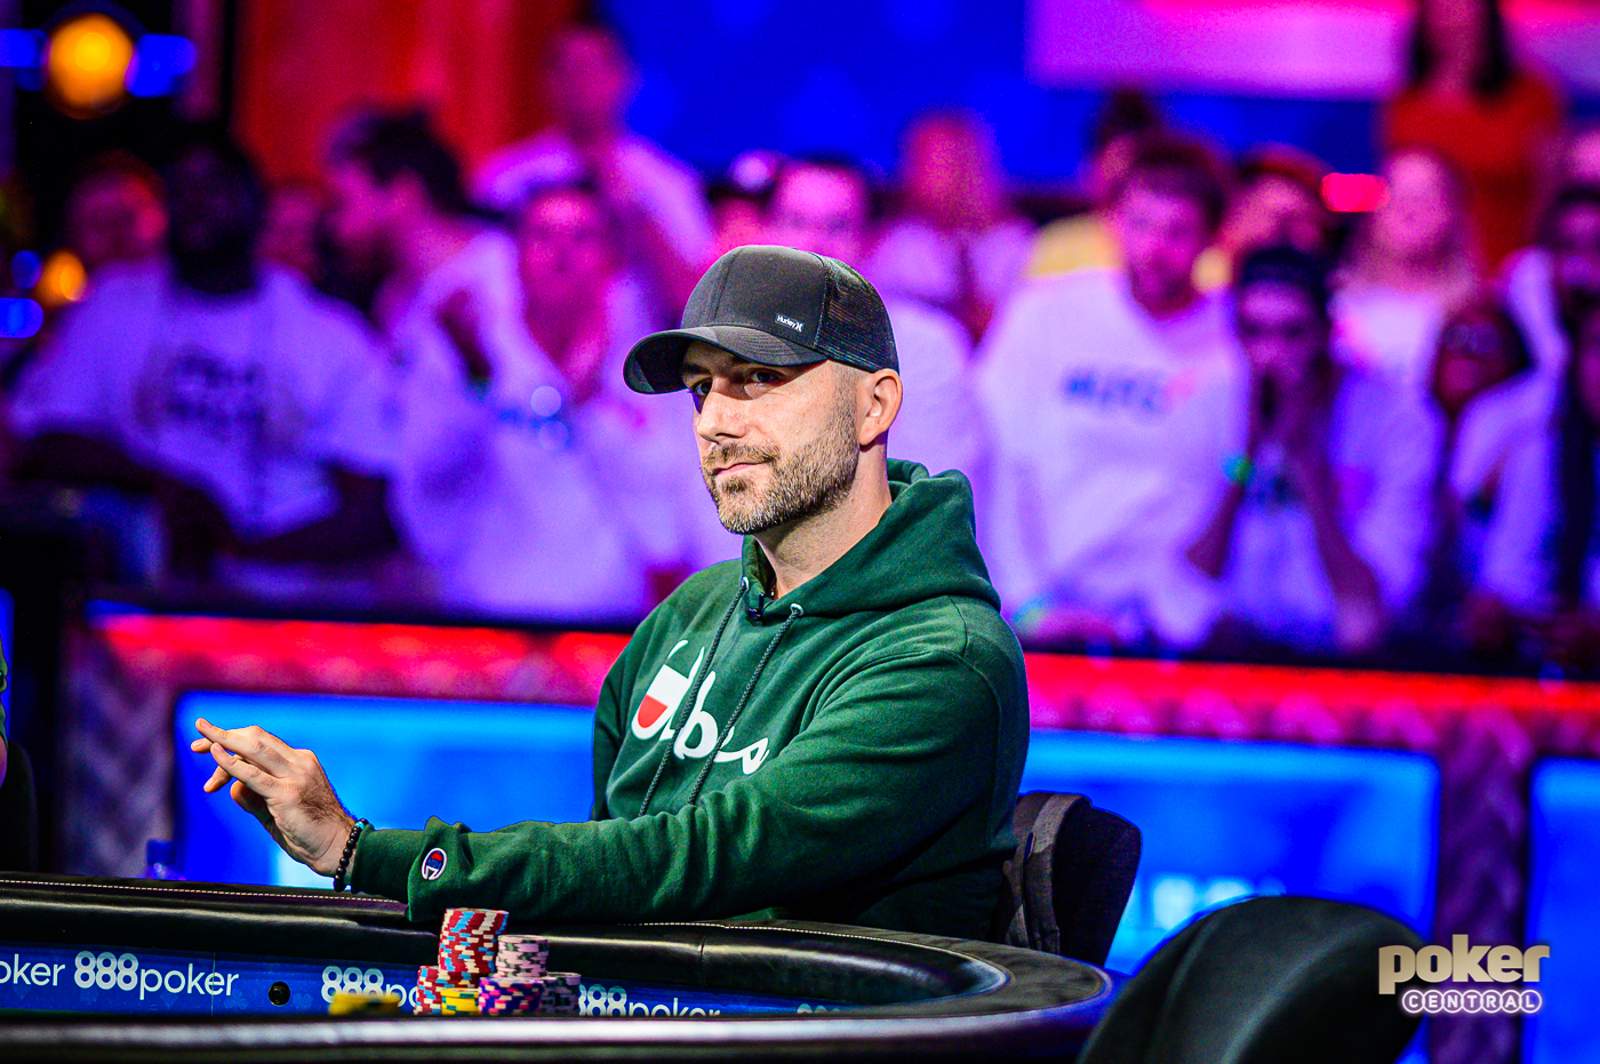 WSOP Main Event Day 8: Five Remain as Hossein Ensan and Garry Gates Eye $10 Million Top Prize